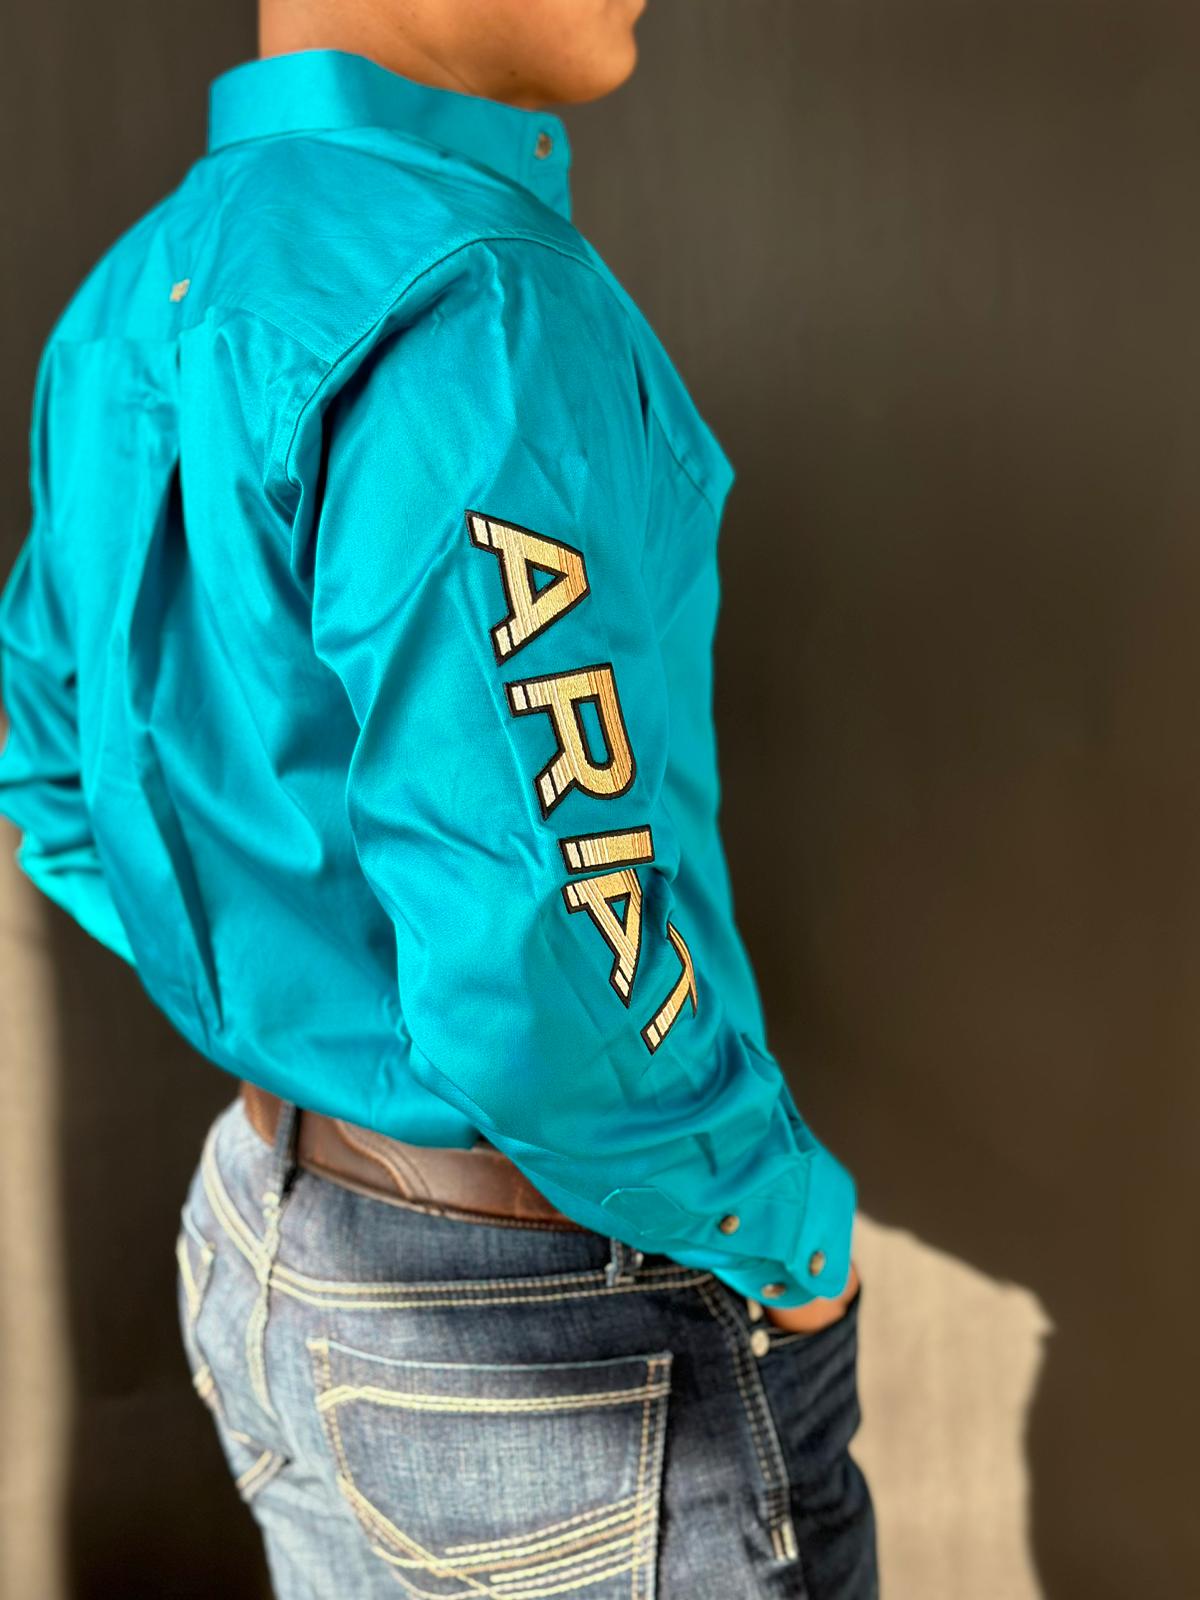 Ariat shirt team logo deep fitted  turquoise